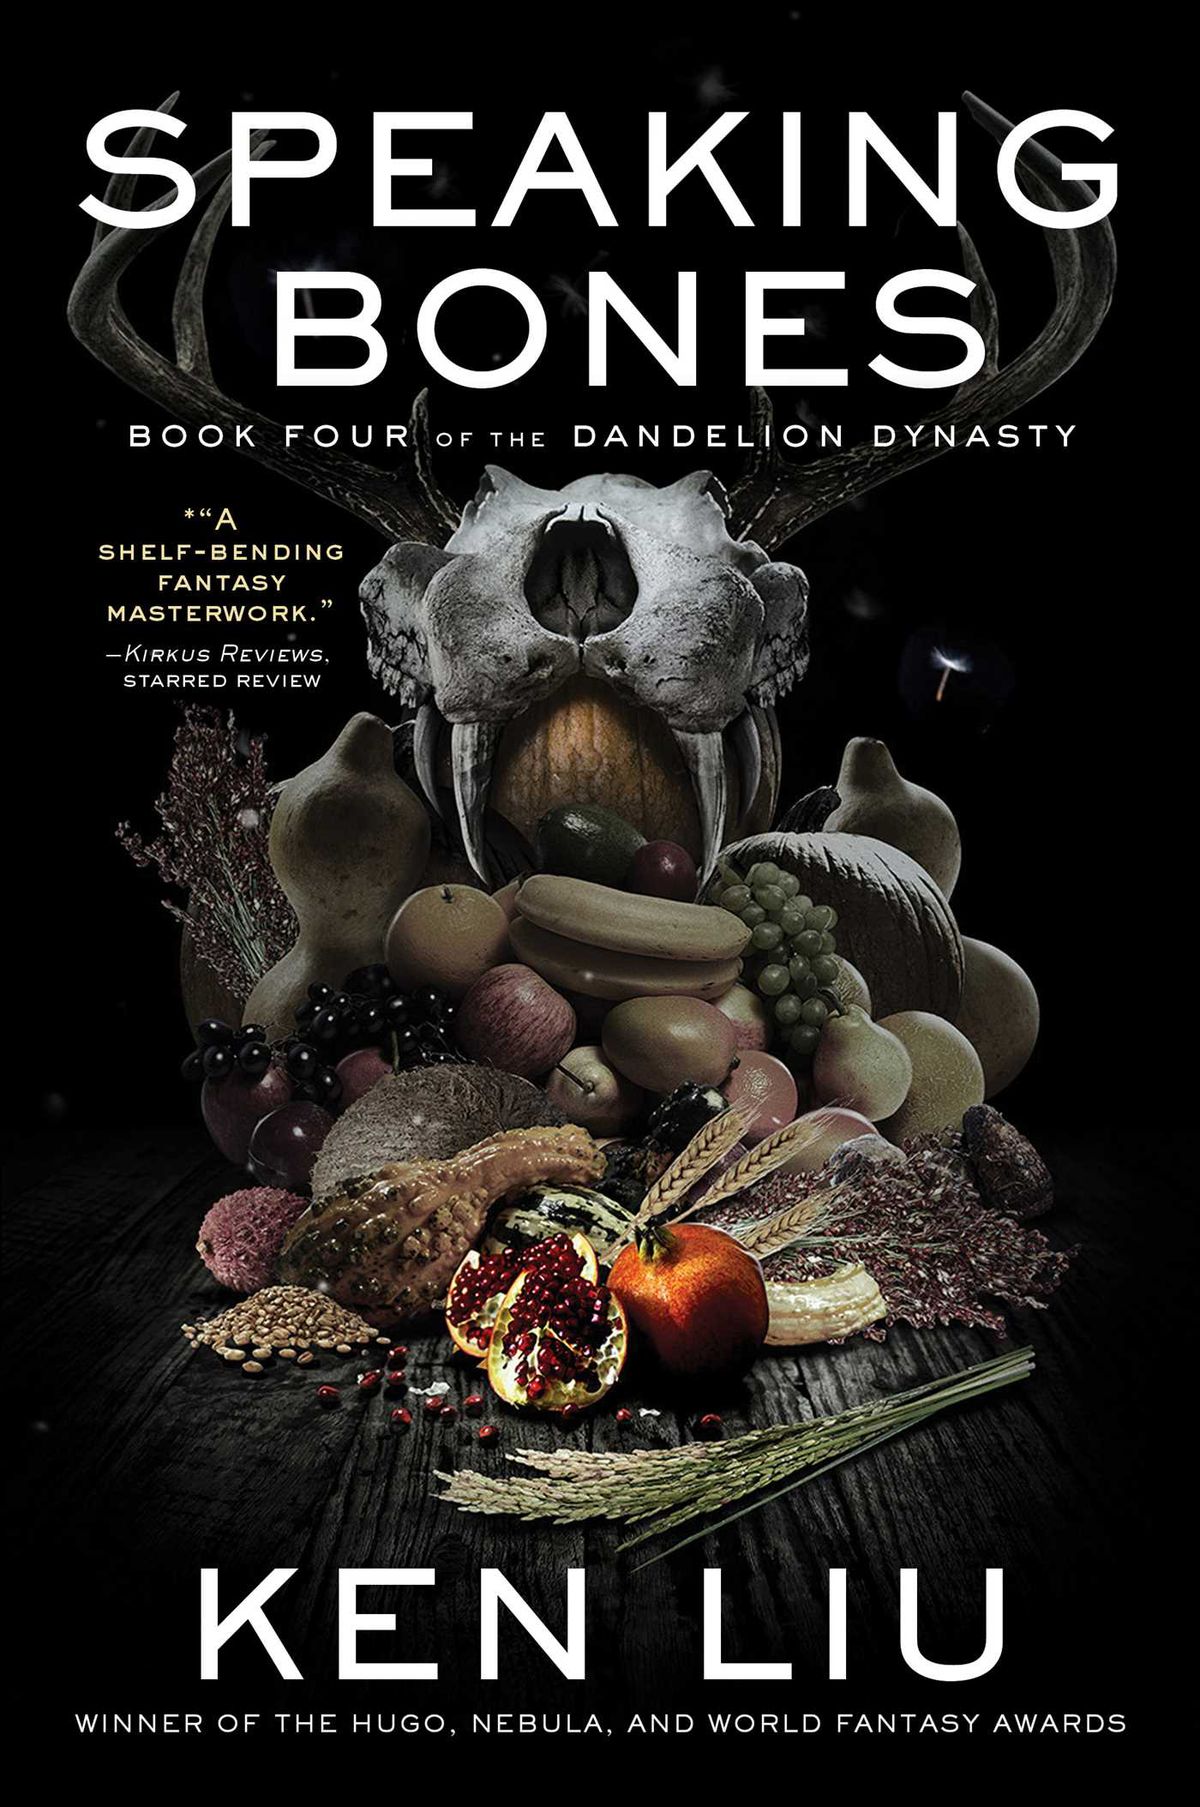 The cover image for Ken Liu’s Speaking Bones, which depicts a cornucopia of fruits and vegetables inside an antlered skull.